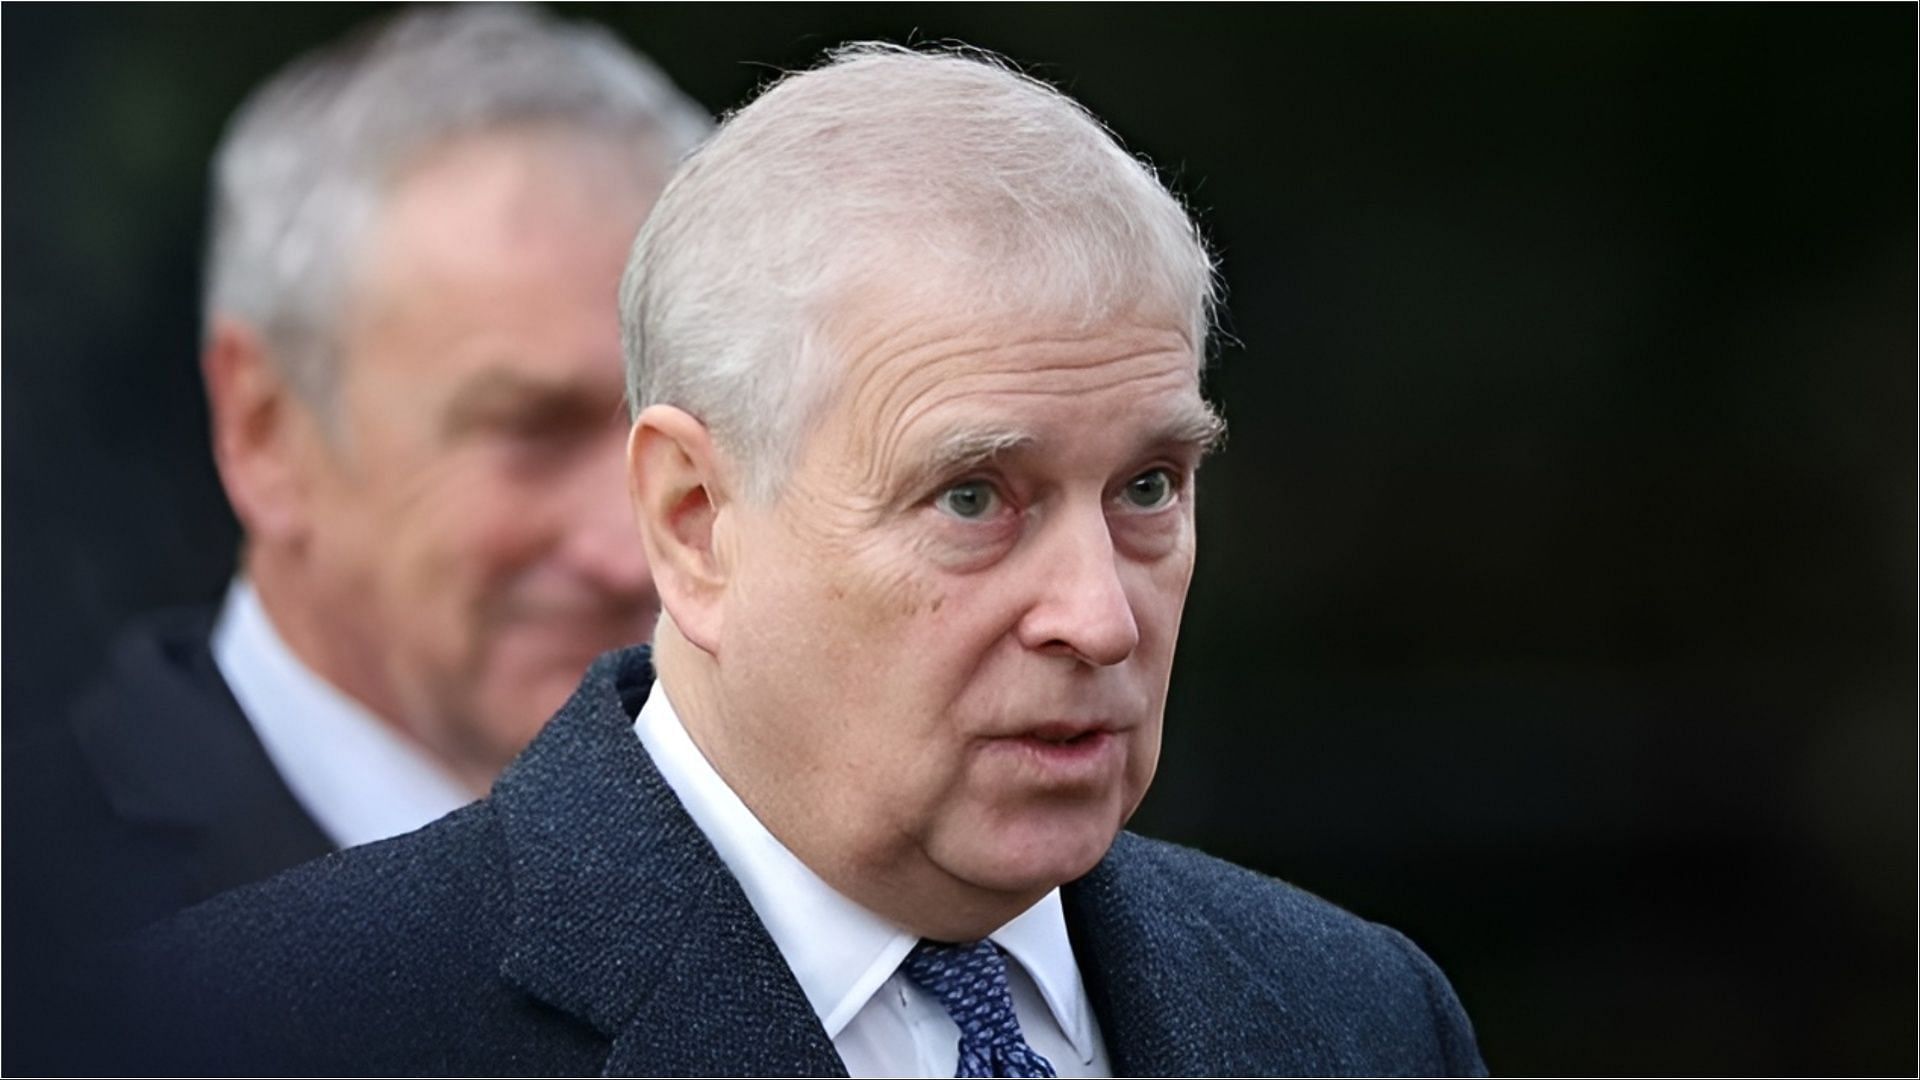 Prince Andrew has been staying at the Royal Lodge after named in Virginia Giuffre